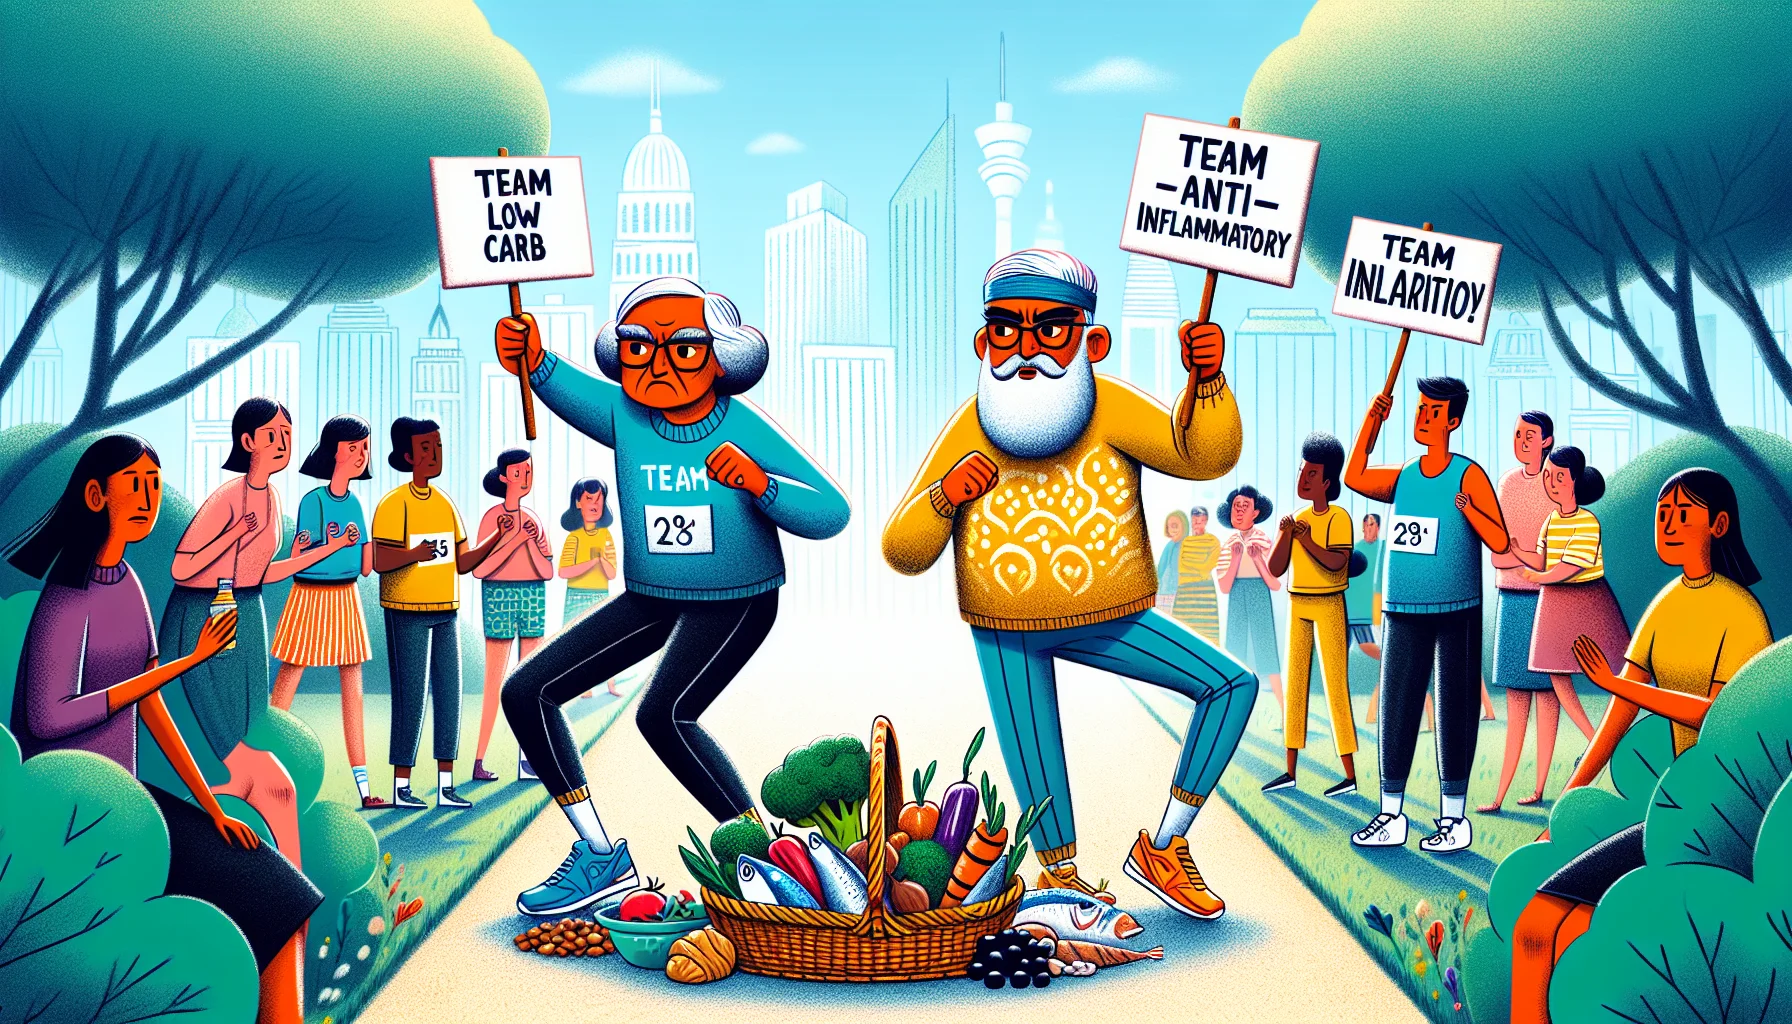 Illustrate a humorous scene set in a bustling urban park filled with diverse people, focusing on an old Hispanic woman and a middle-aged South Asian man. They're both in active wear, stretching and warming up for a race. They're holding signs that read 'Team Low Carb' and 'Team Anti-Inflammatory'. They've brought a picnic basket loaded with fresh colourful vegetables, fish, olives, nuts and berries, symbolic for a healthy diet. The pair wear exaggerated expressions of competitive spirit, making it seem as if they're about to race for the last piece of broccoli. Egged on by a diverse crowd of intrigued onlookers.